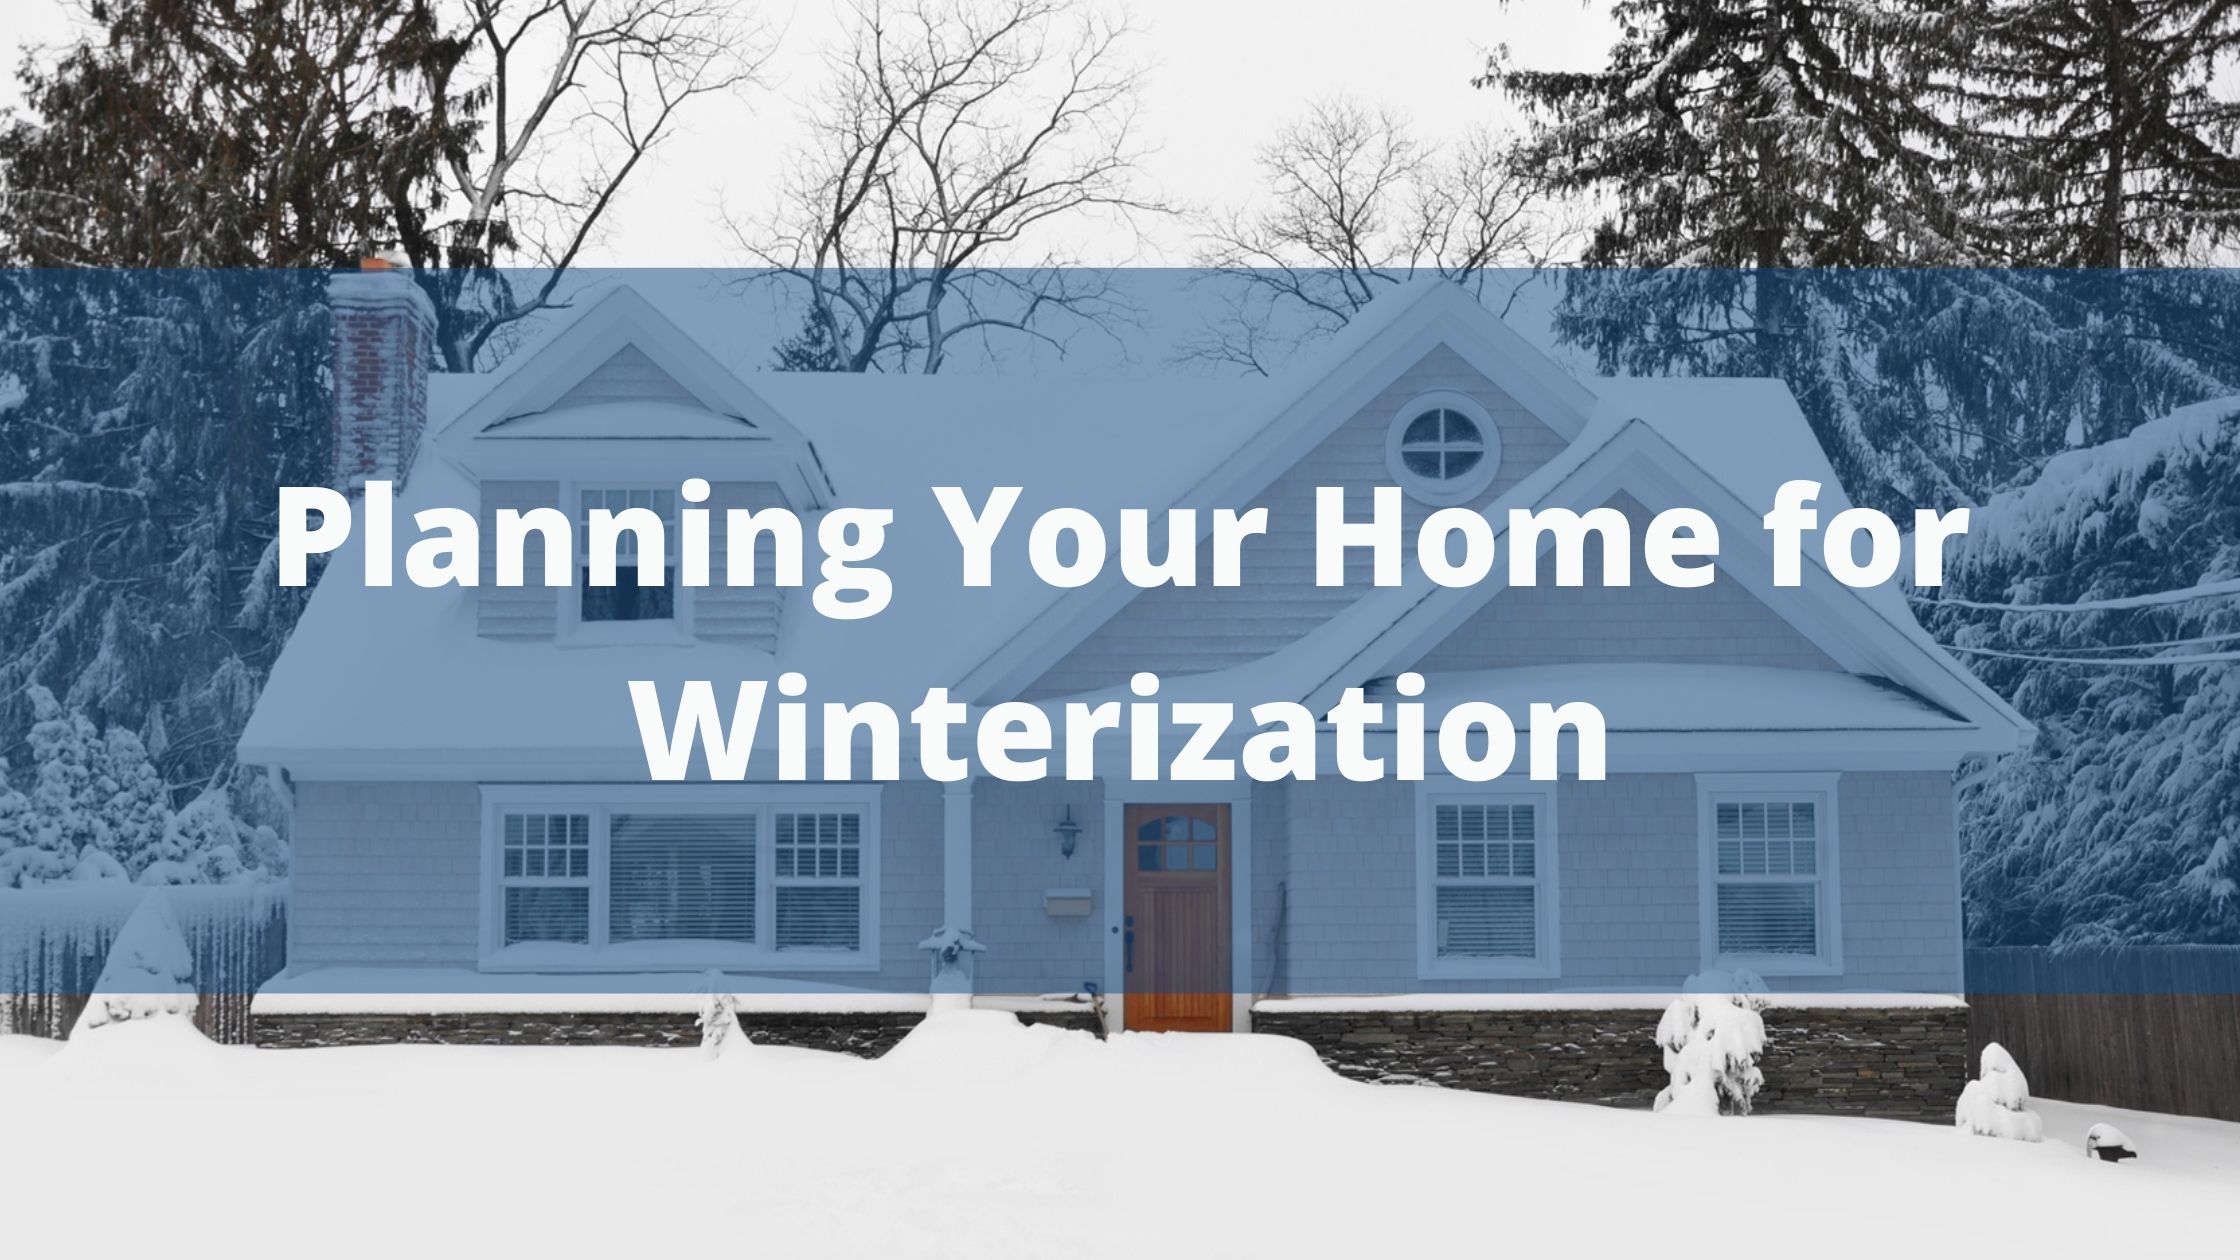 https://handymanconnection.com/wp-content/uploads/2021/08/Planning-Your-Home-for-Winterization.jpg